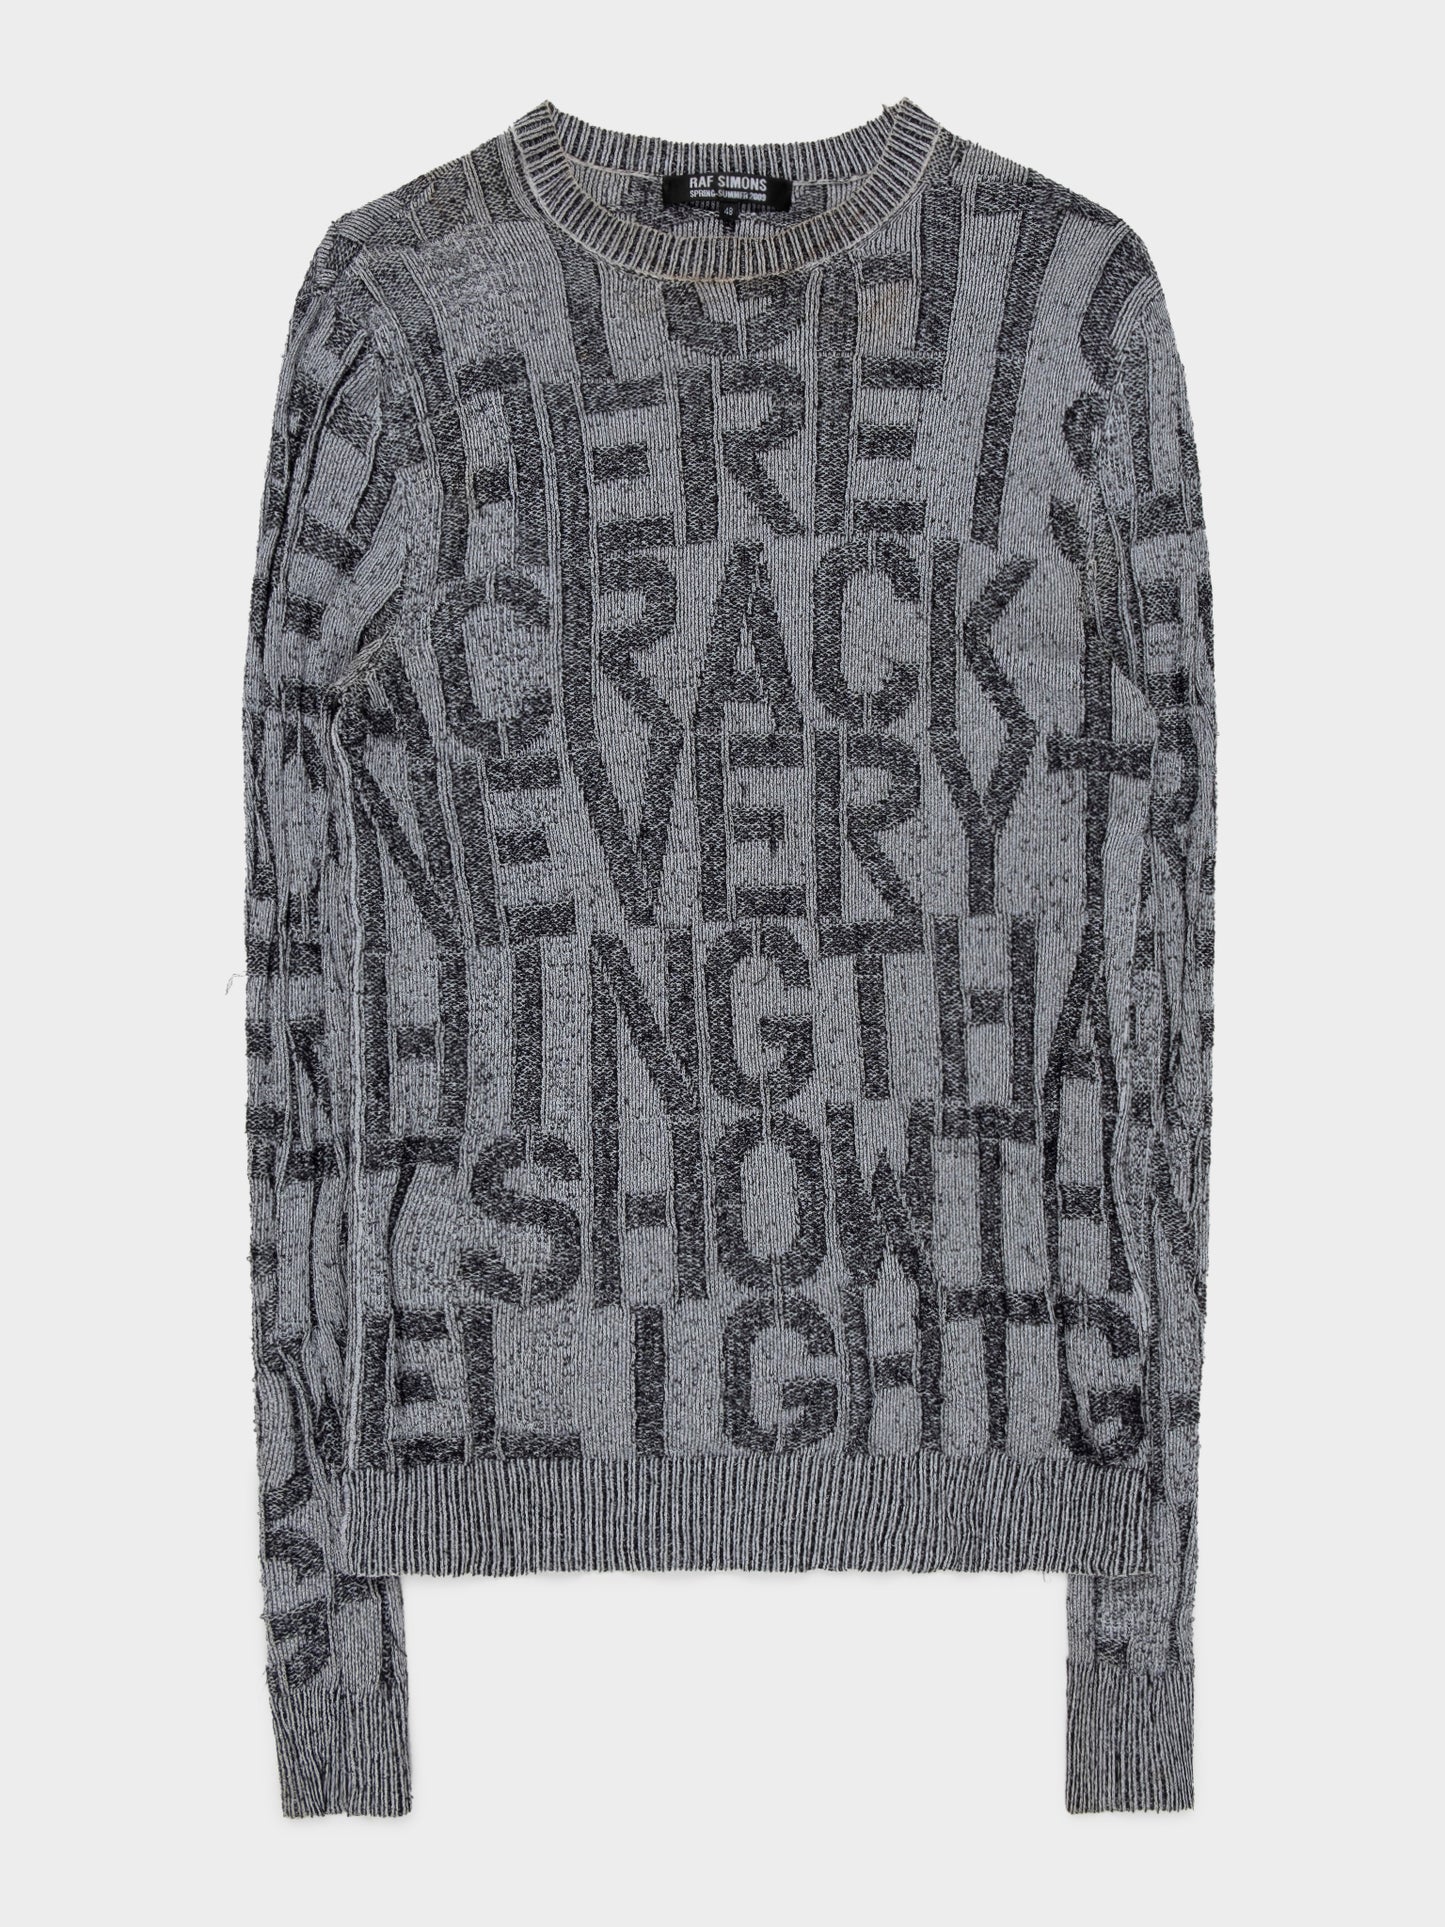 Christopher Wool Knit